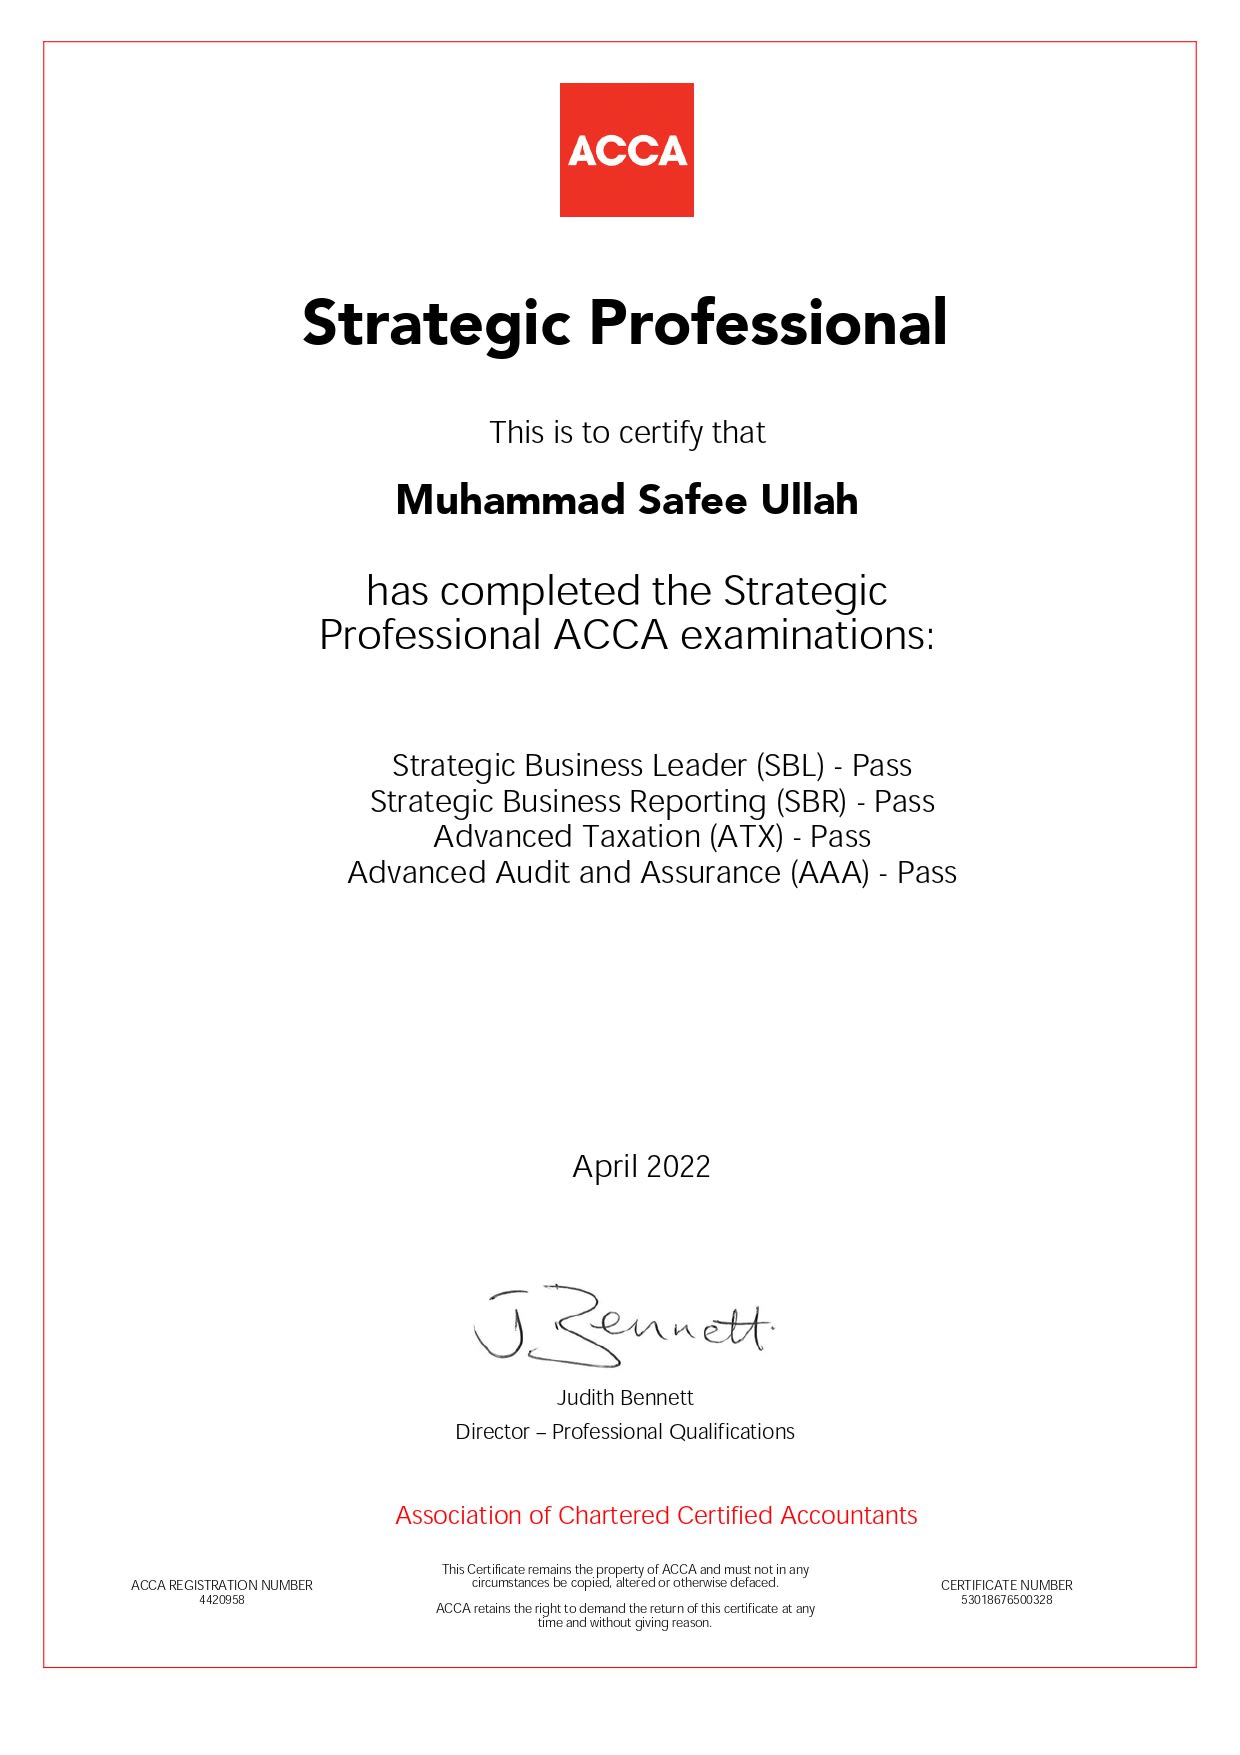 Help acca students for preparation study support by Safeekhan408 Fiverr